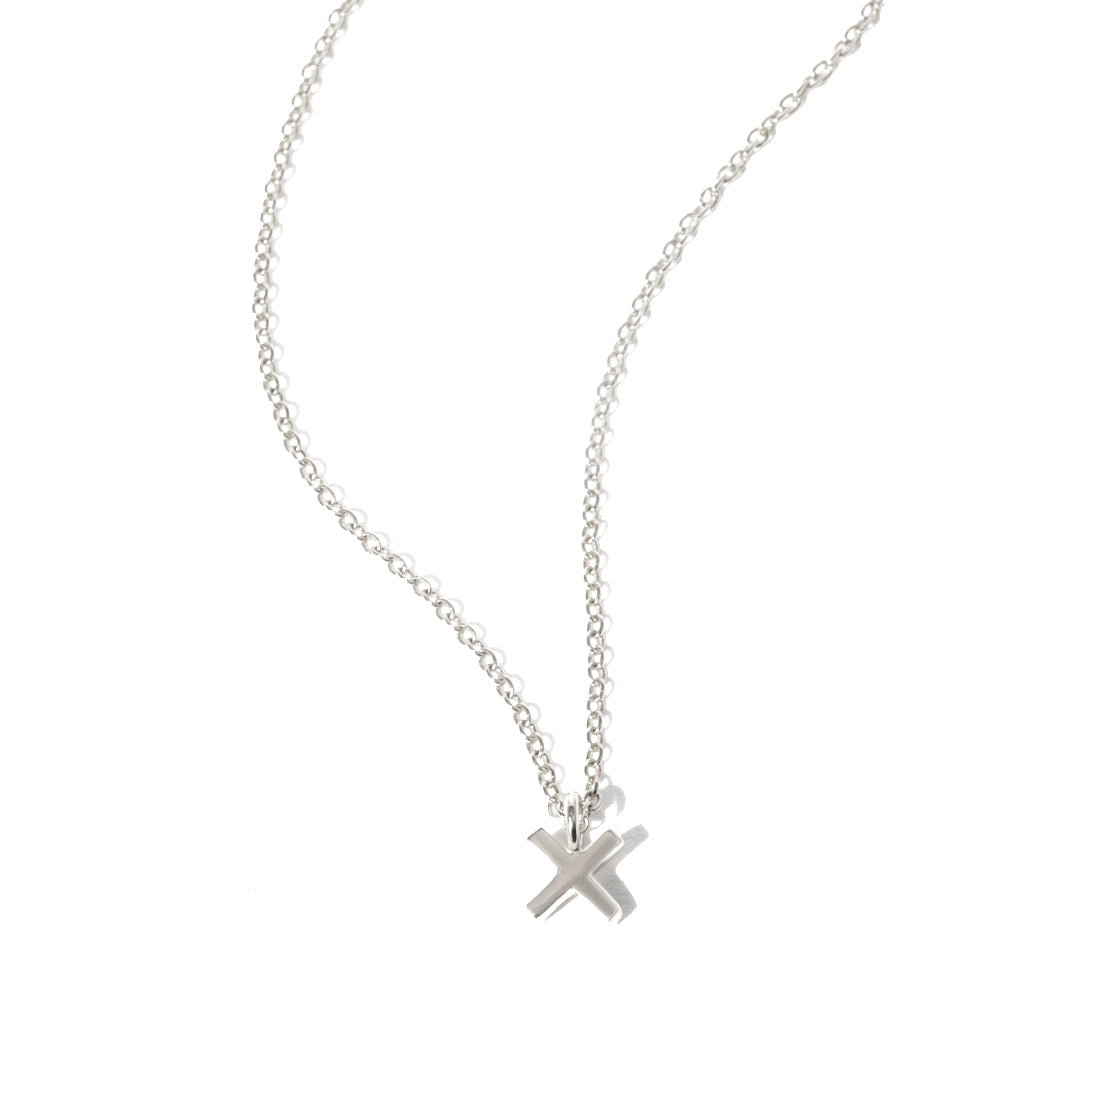 Kiss 'X' Silver Necklace